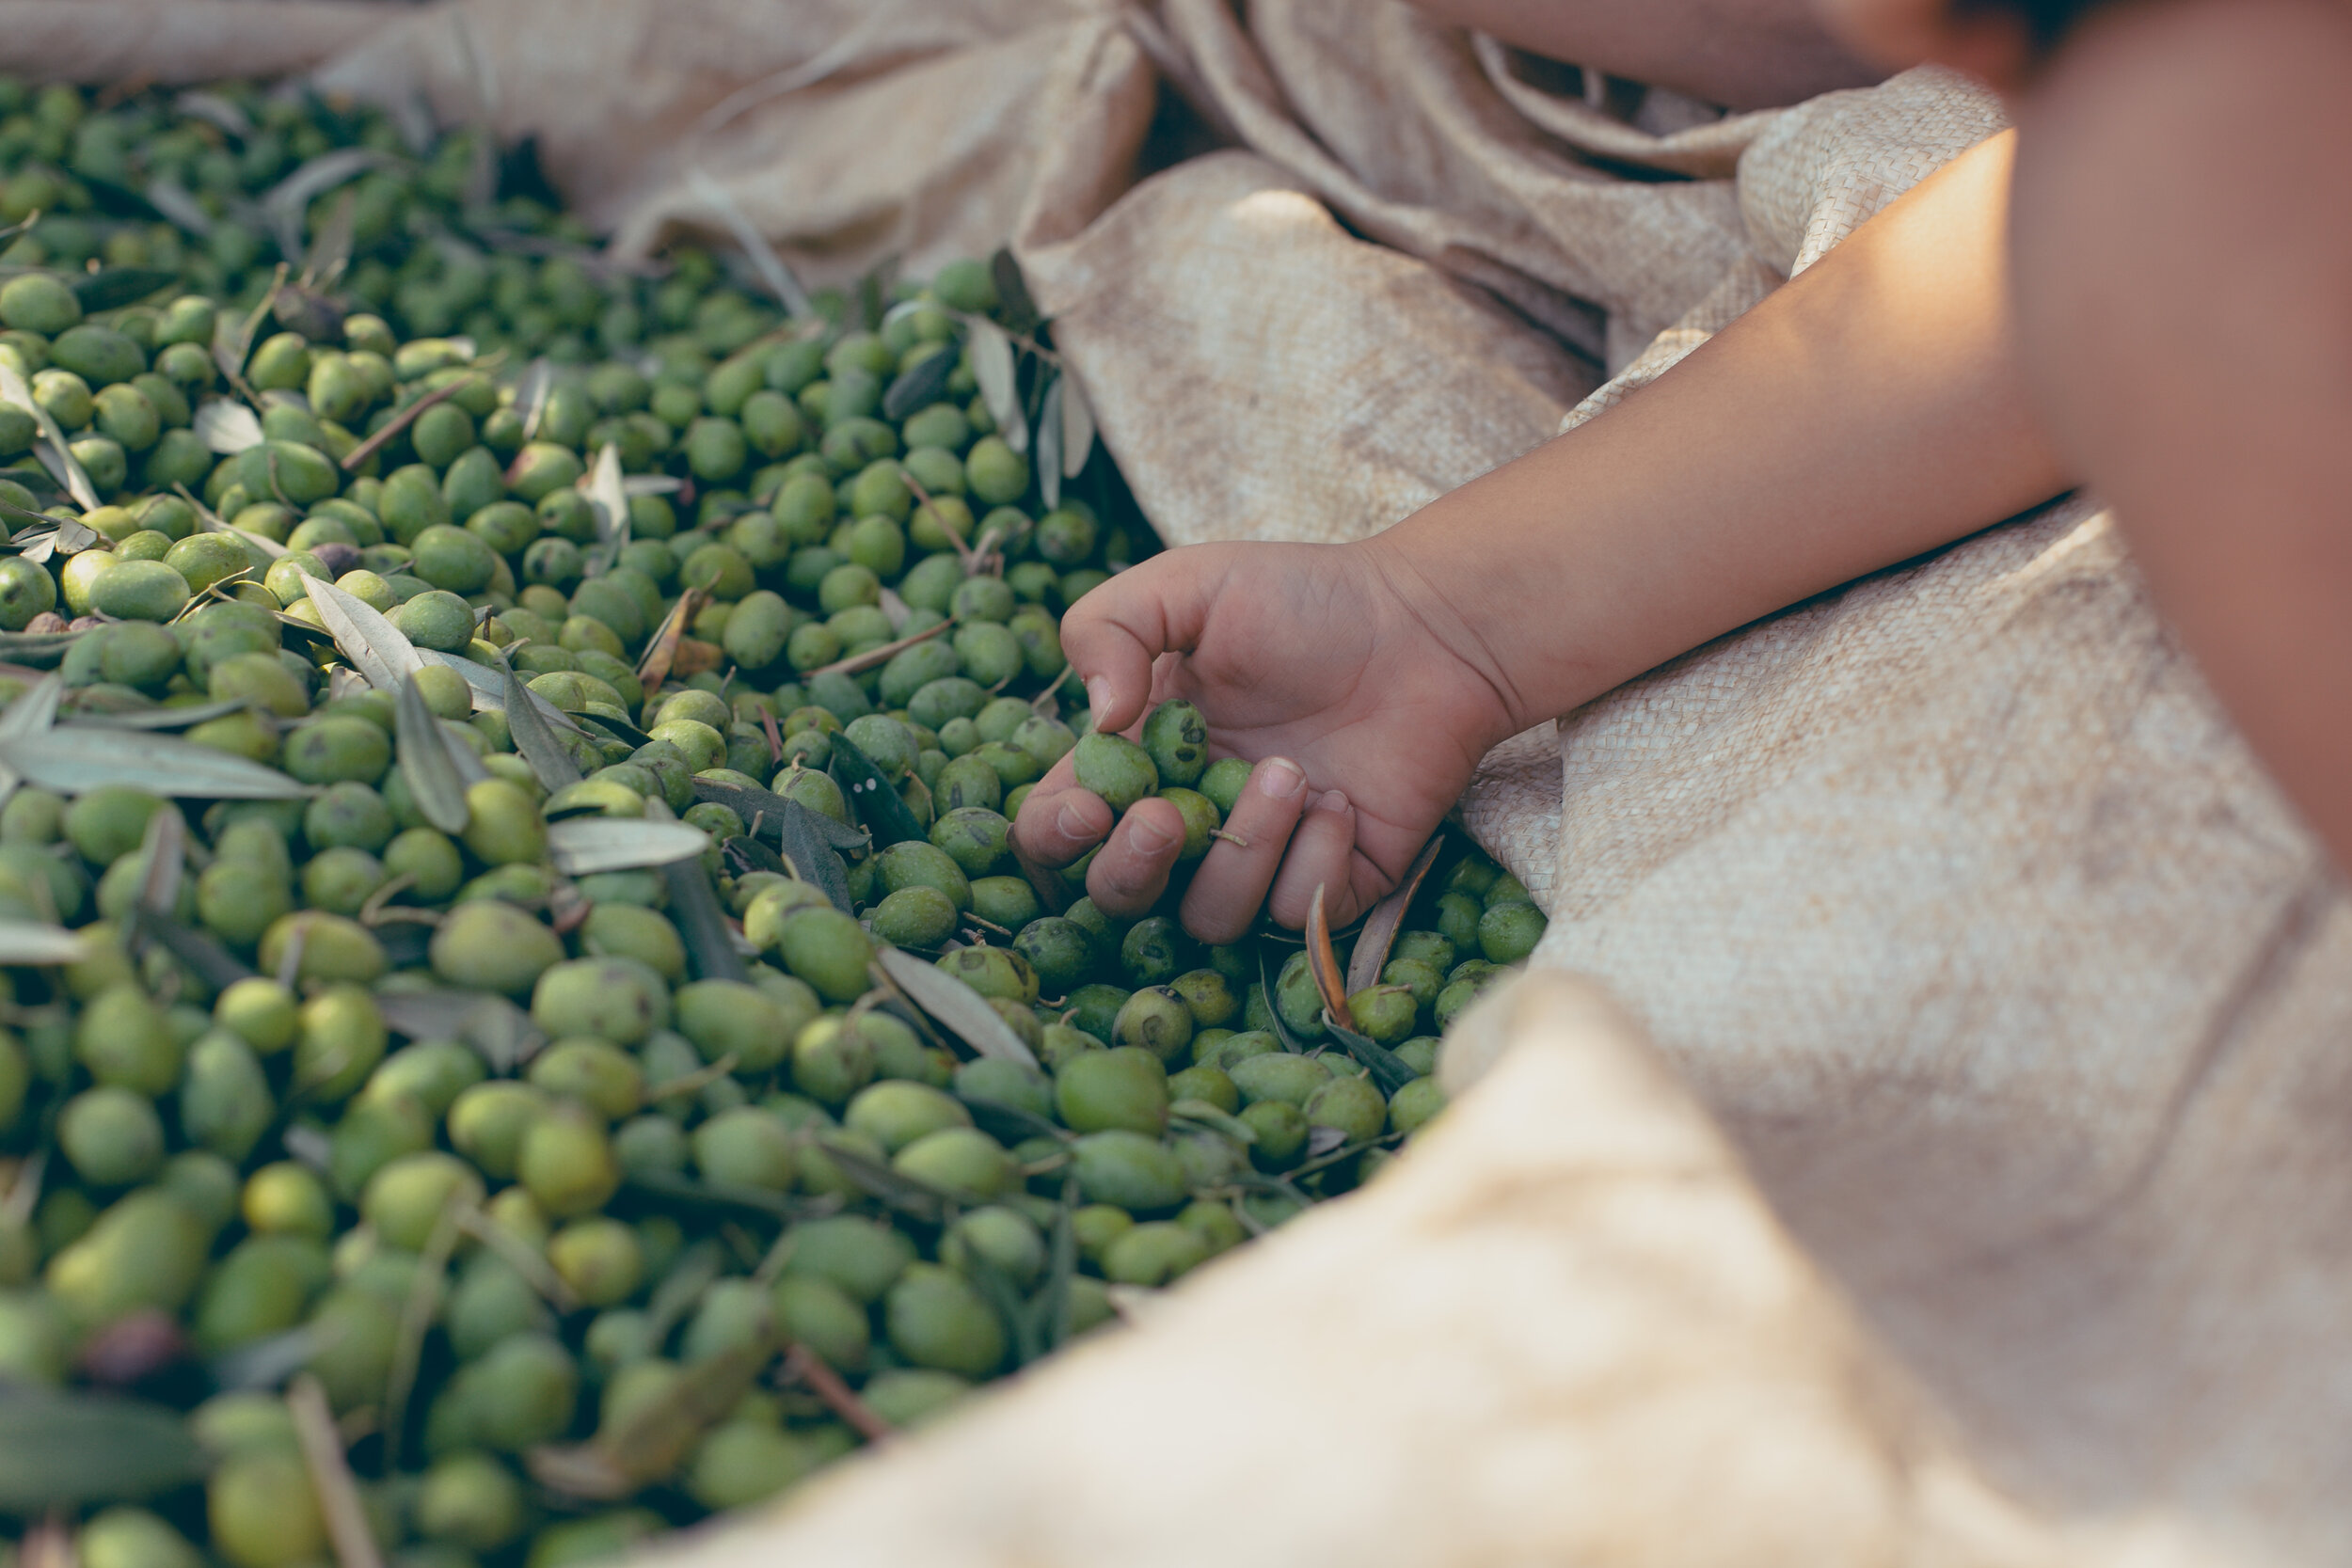 Olives by Jose Daou-1284.jpg